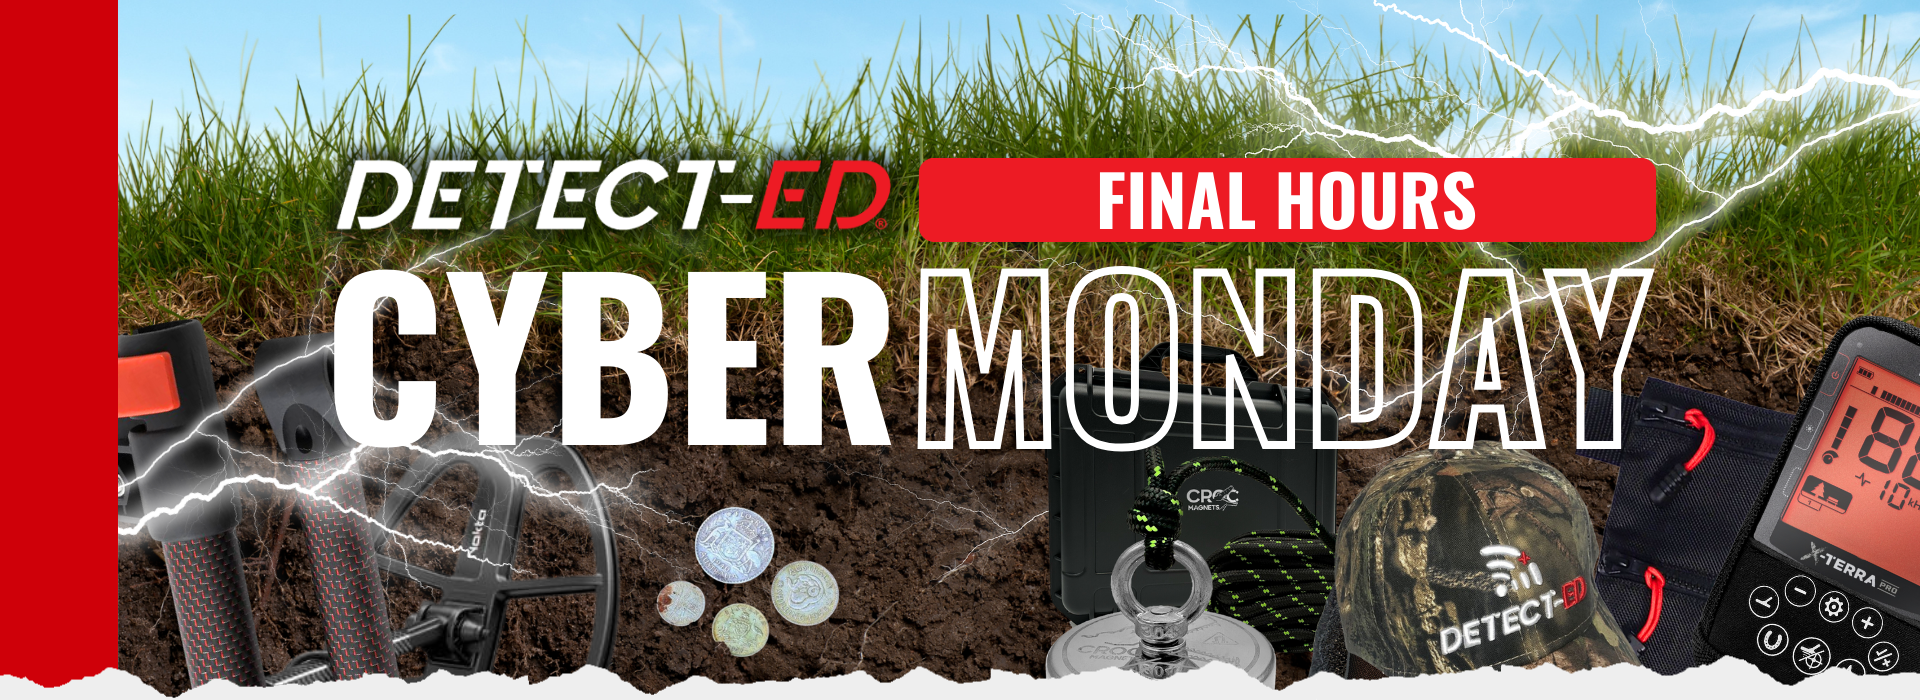 Detect-Ed Cyber Monday Banner (INT)